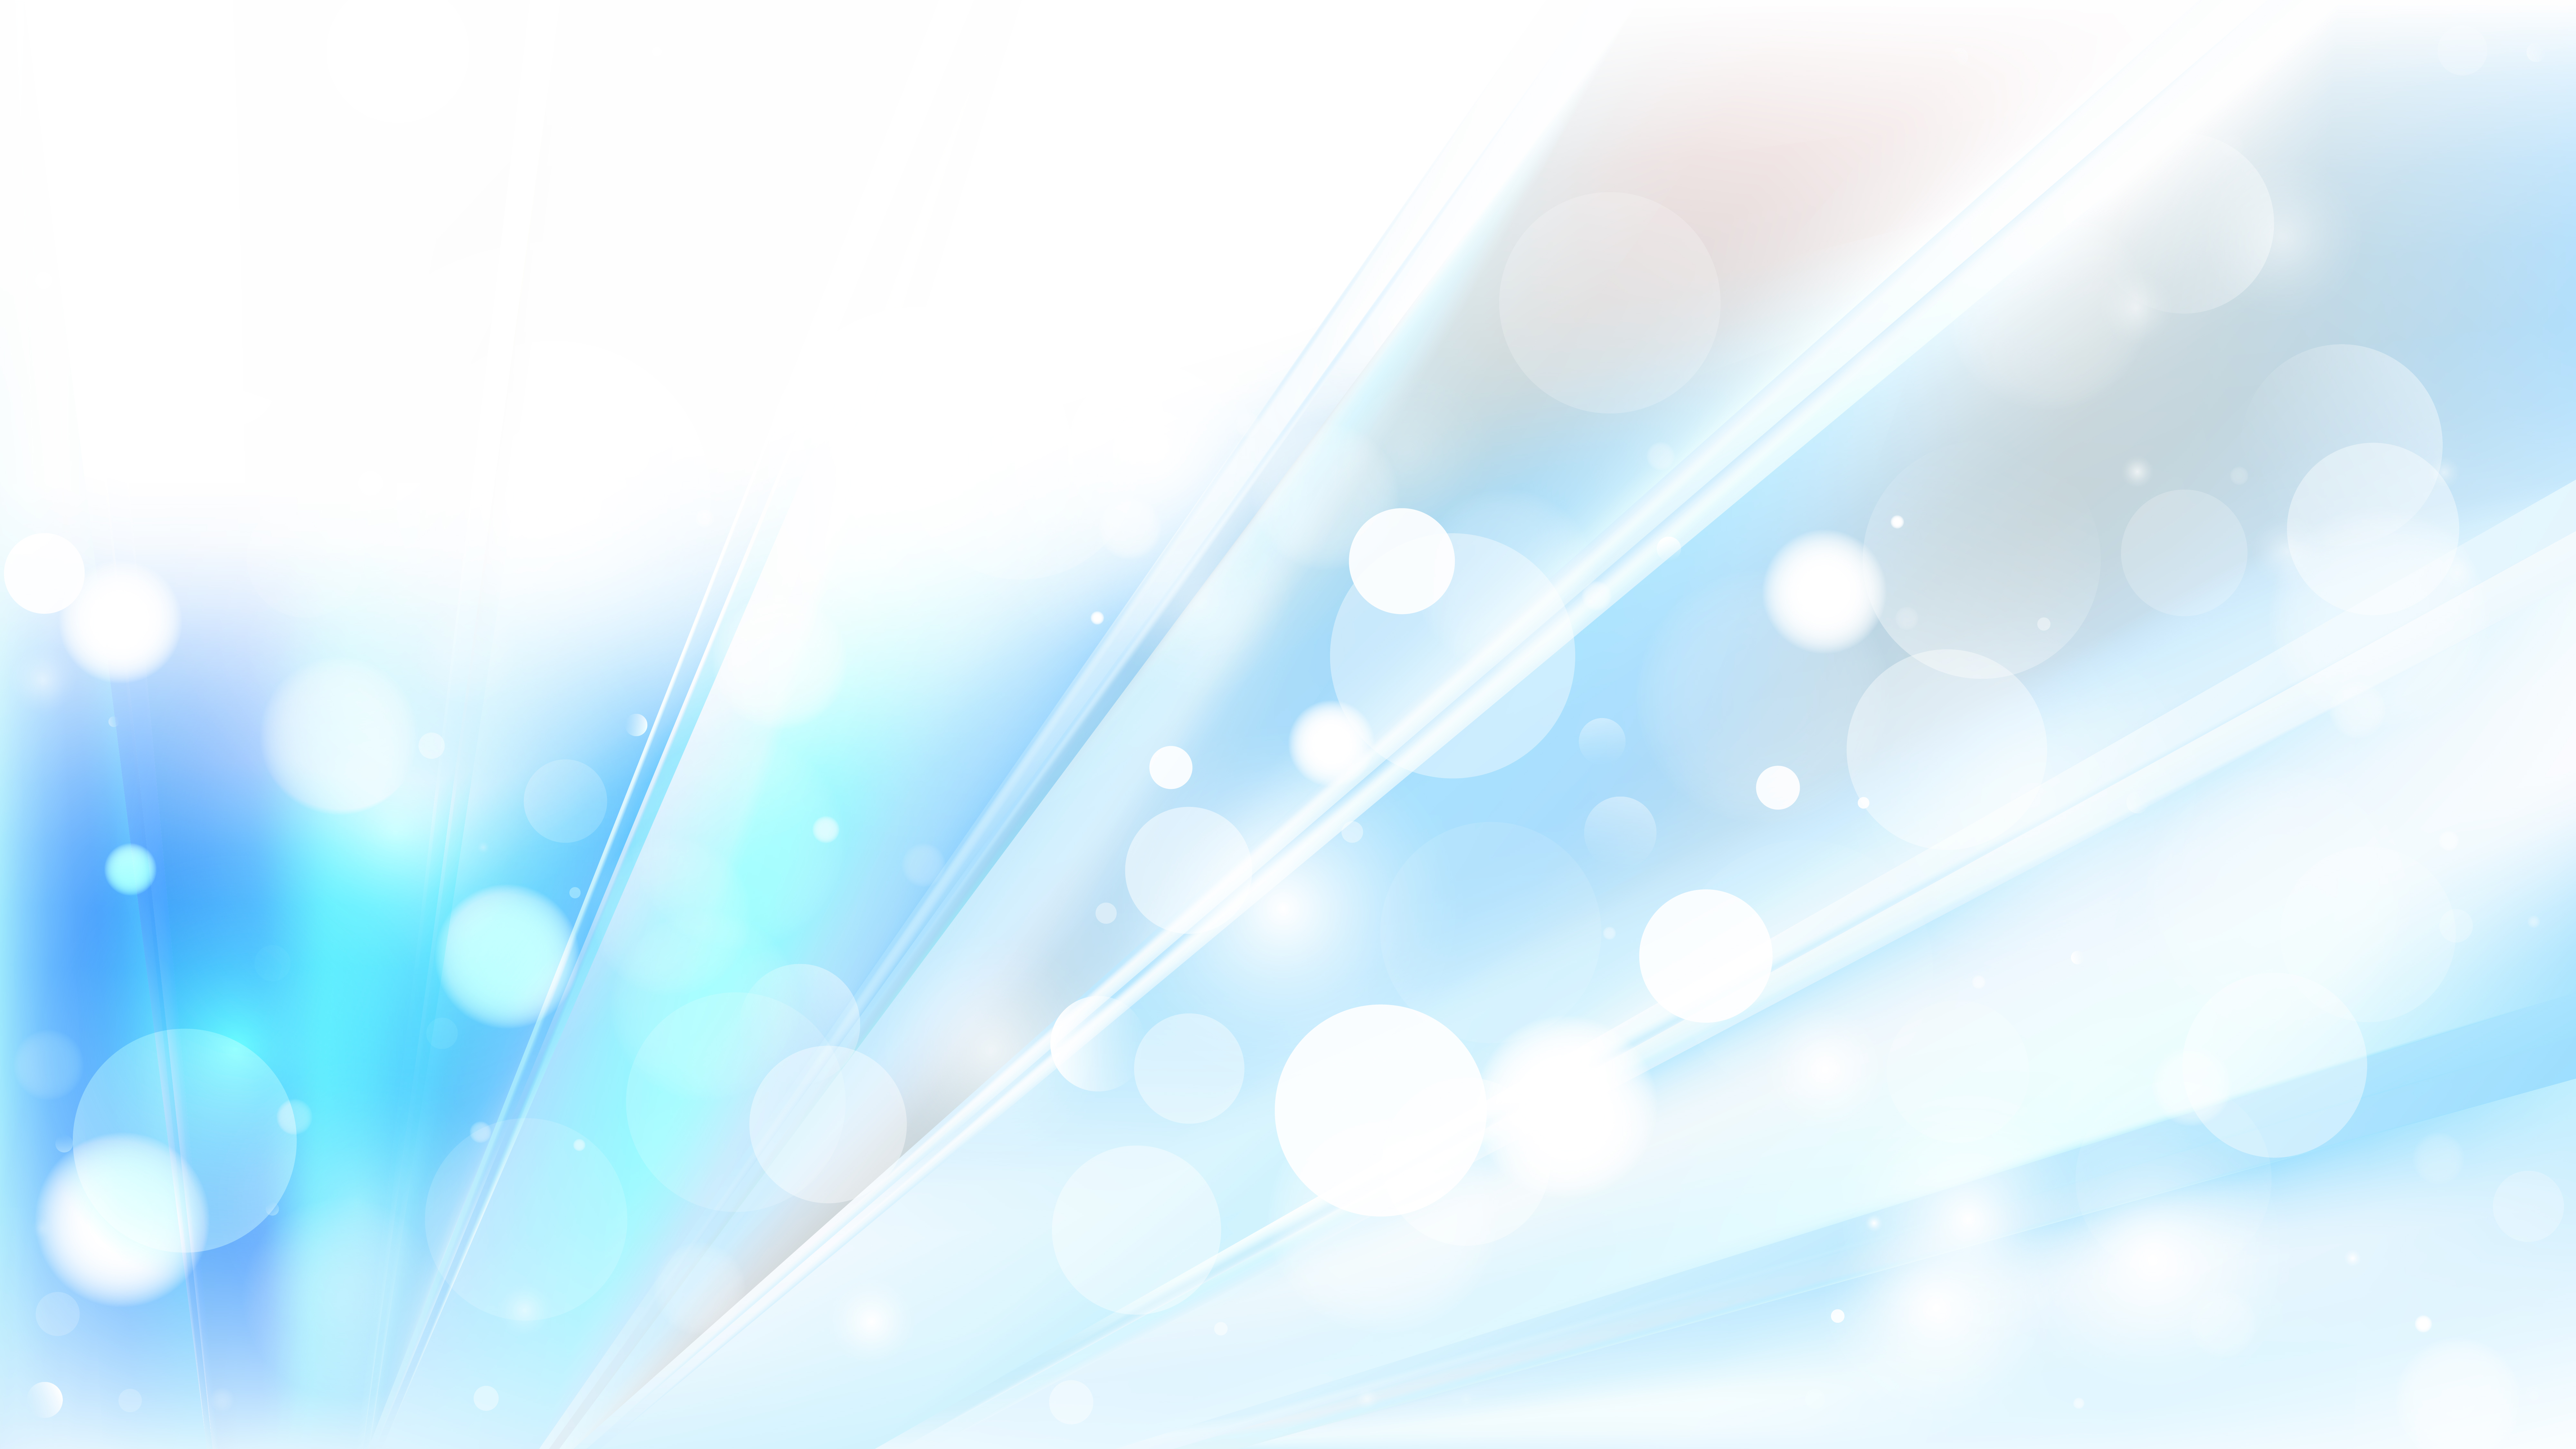 Free Abstract Blue and White Background Image